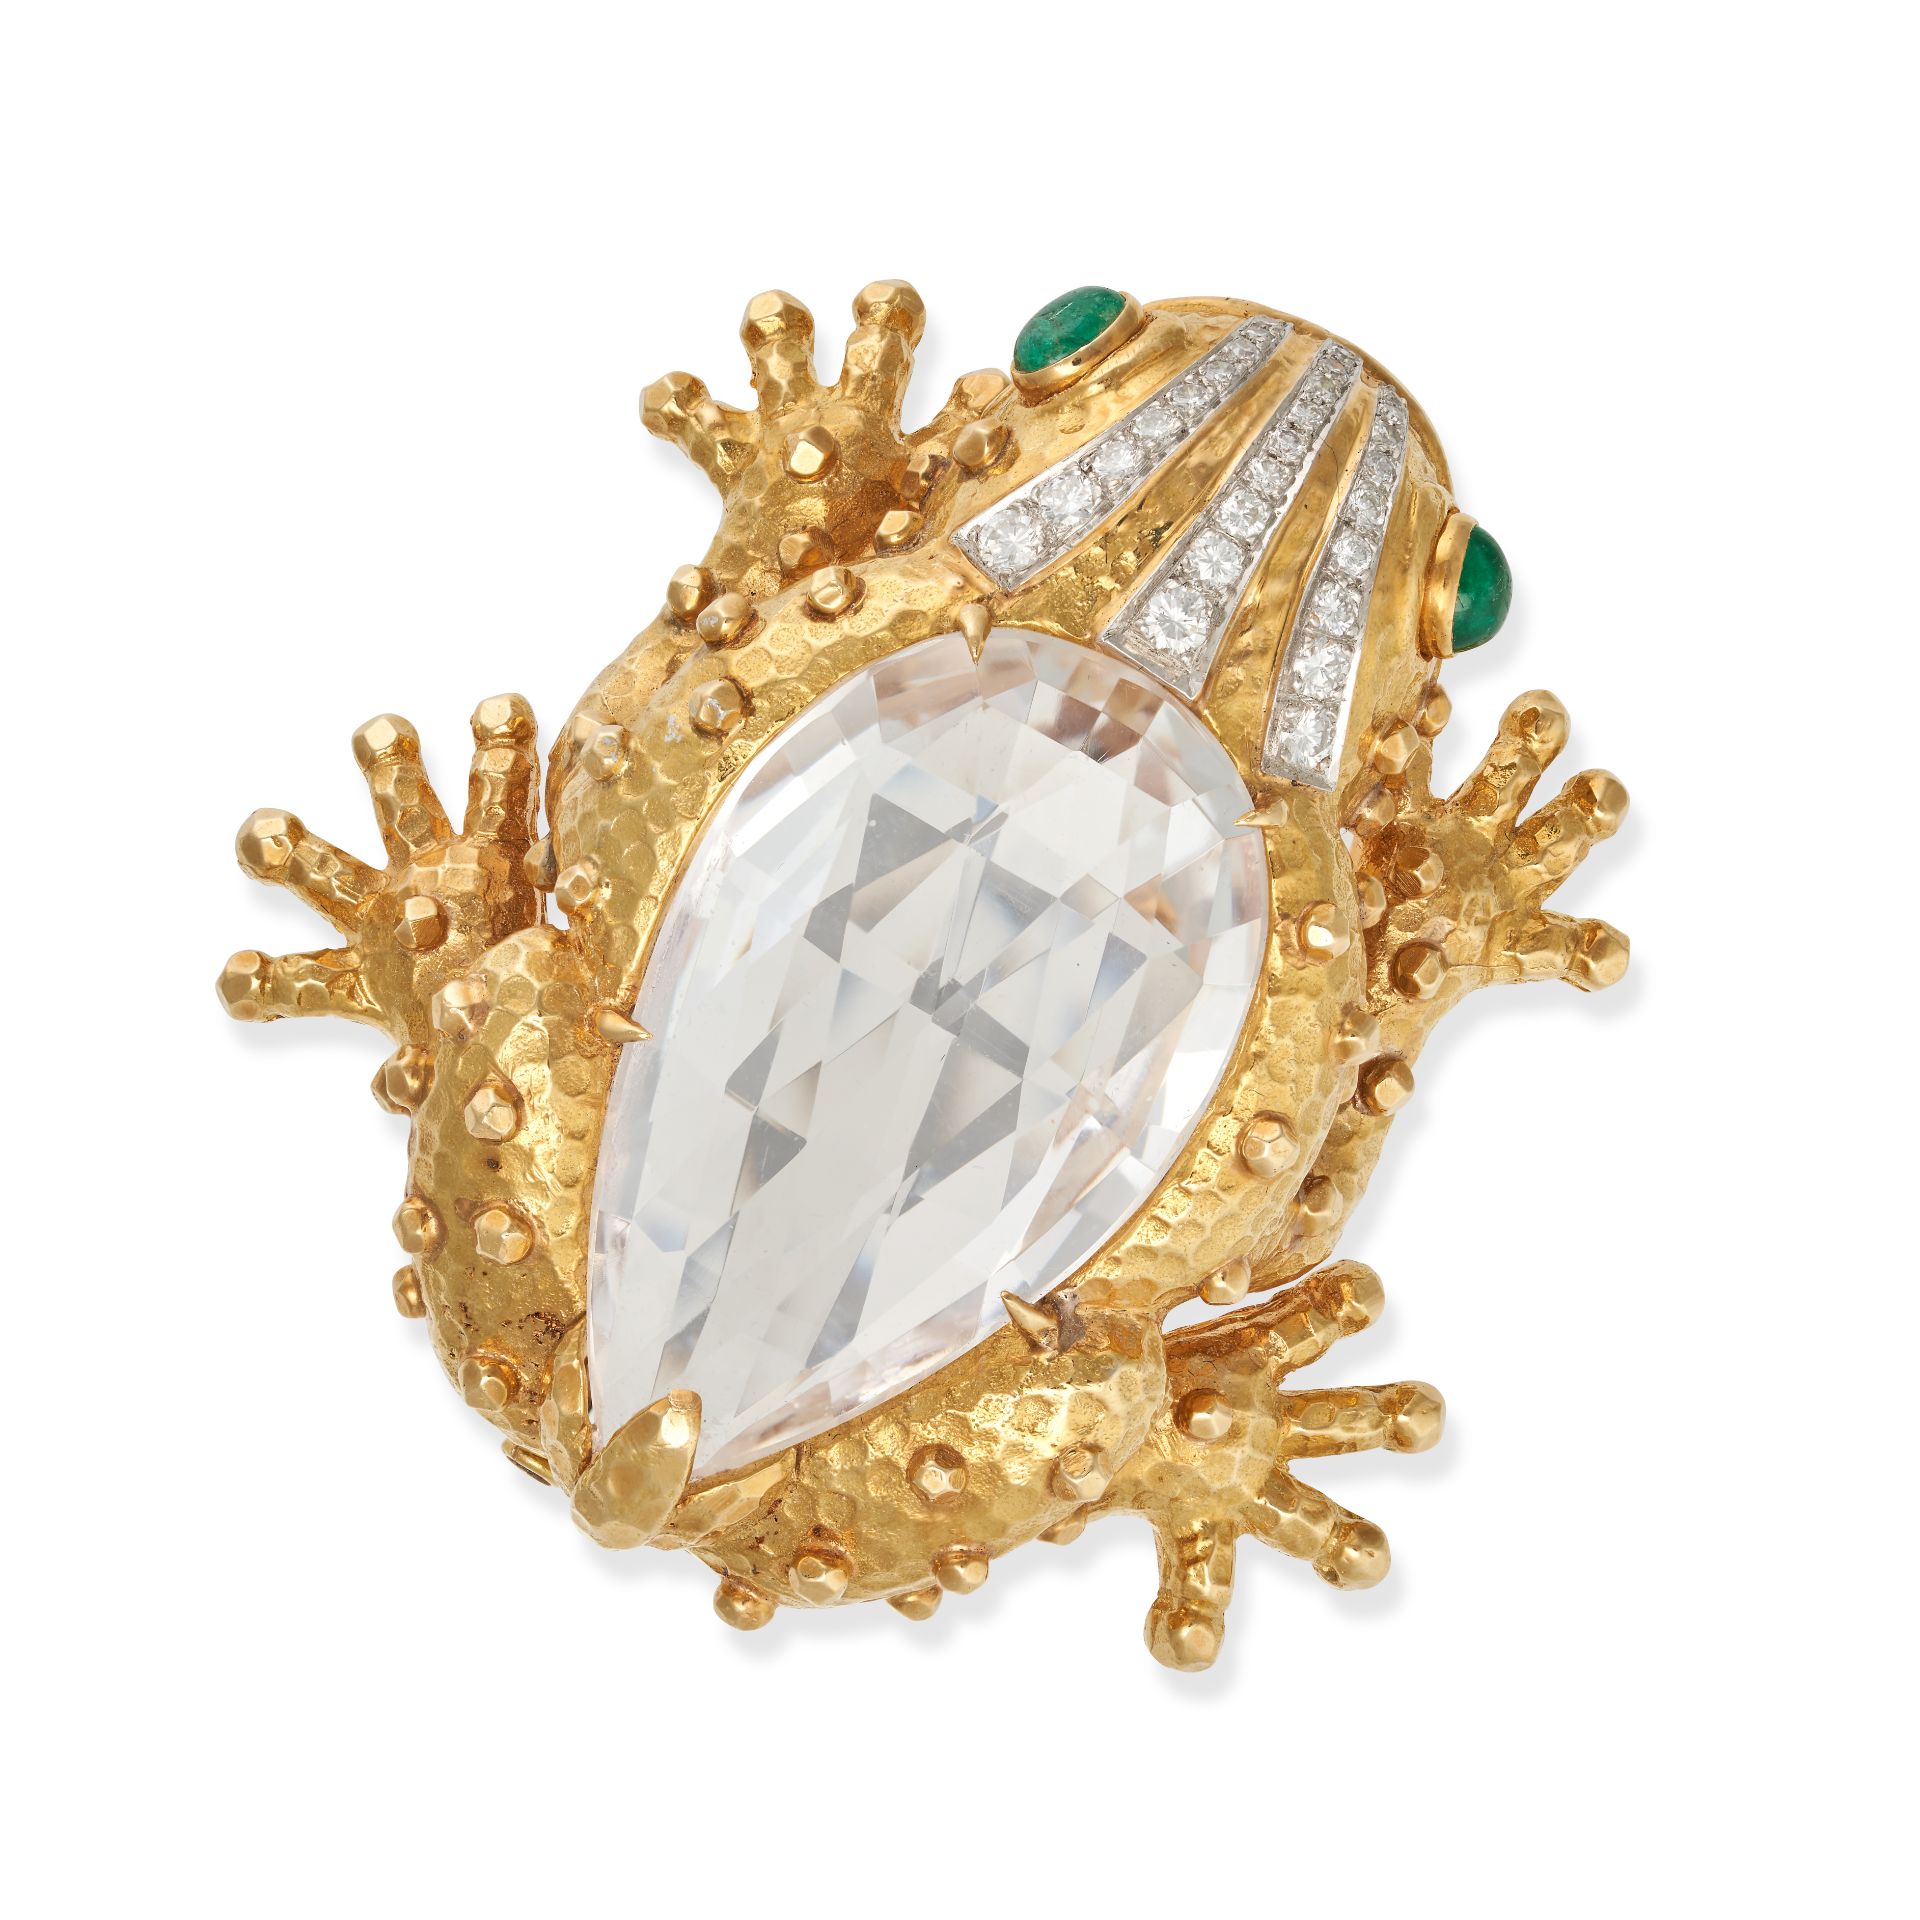 DAVID WEBB, A ROCK CRYSTAL, EMERALD AND DIAMOND FROG BROOCH in 18ct yellow gold and platinum, des...